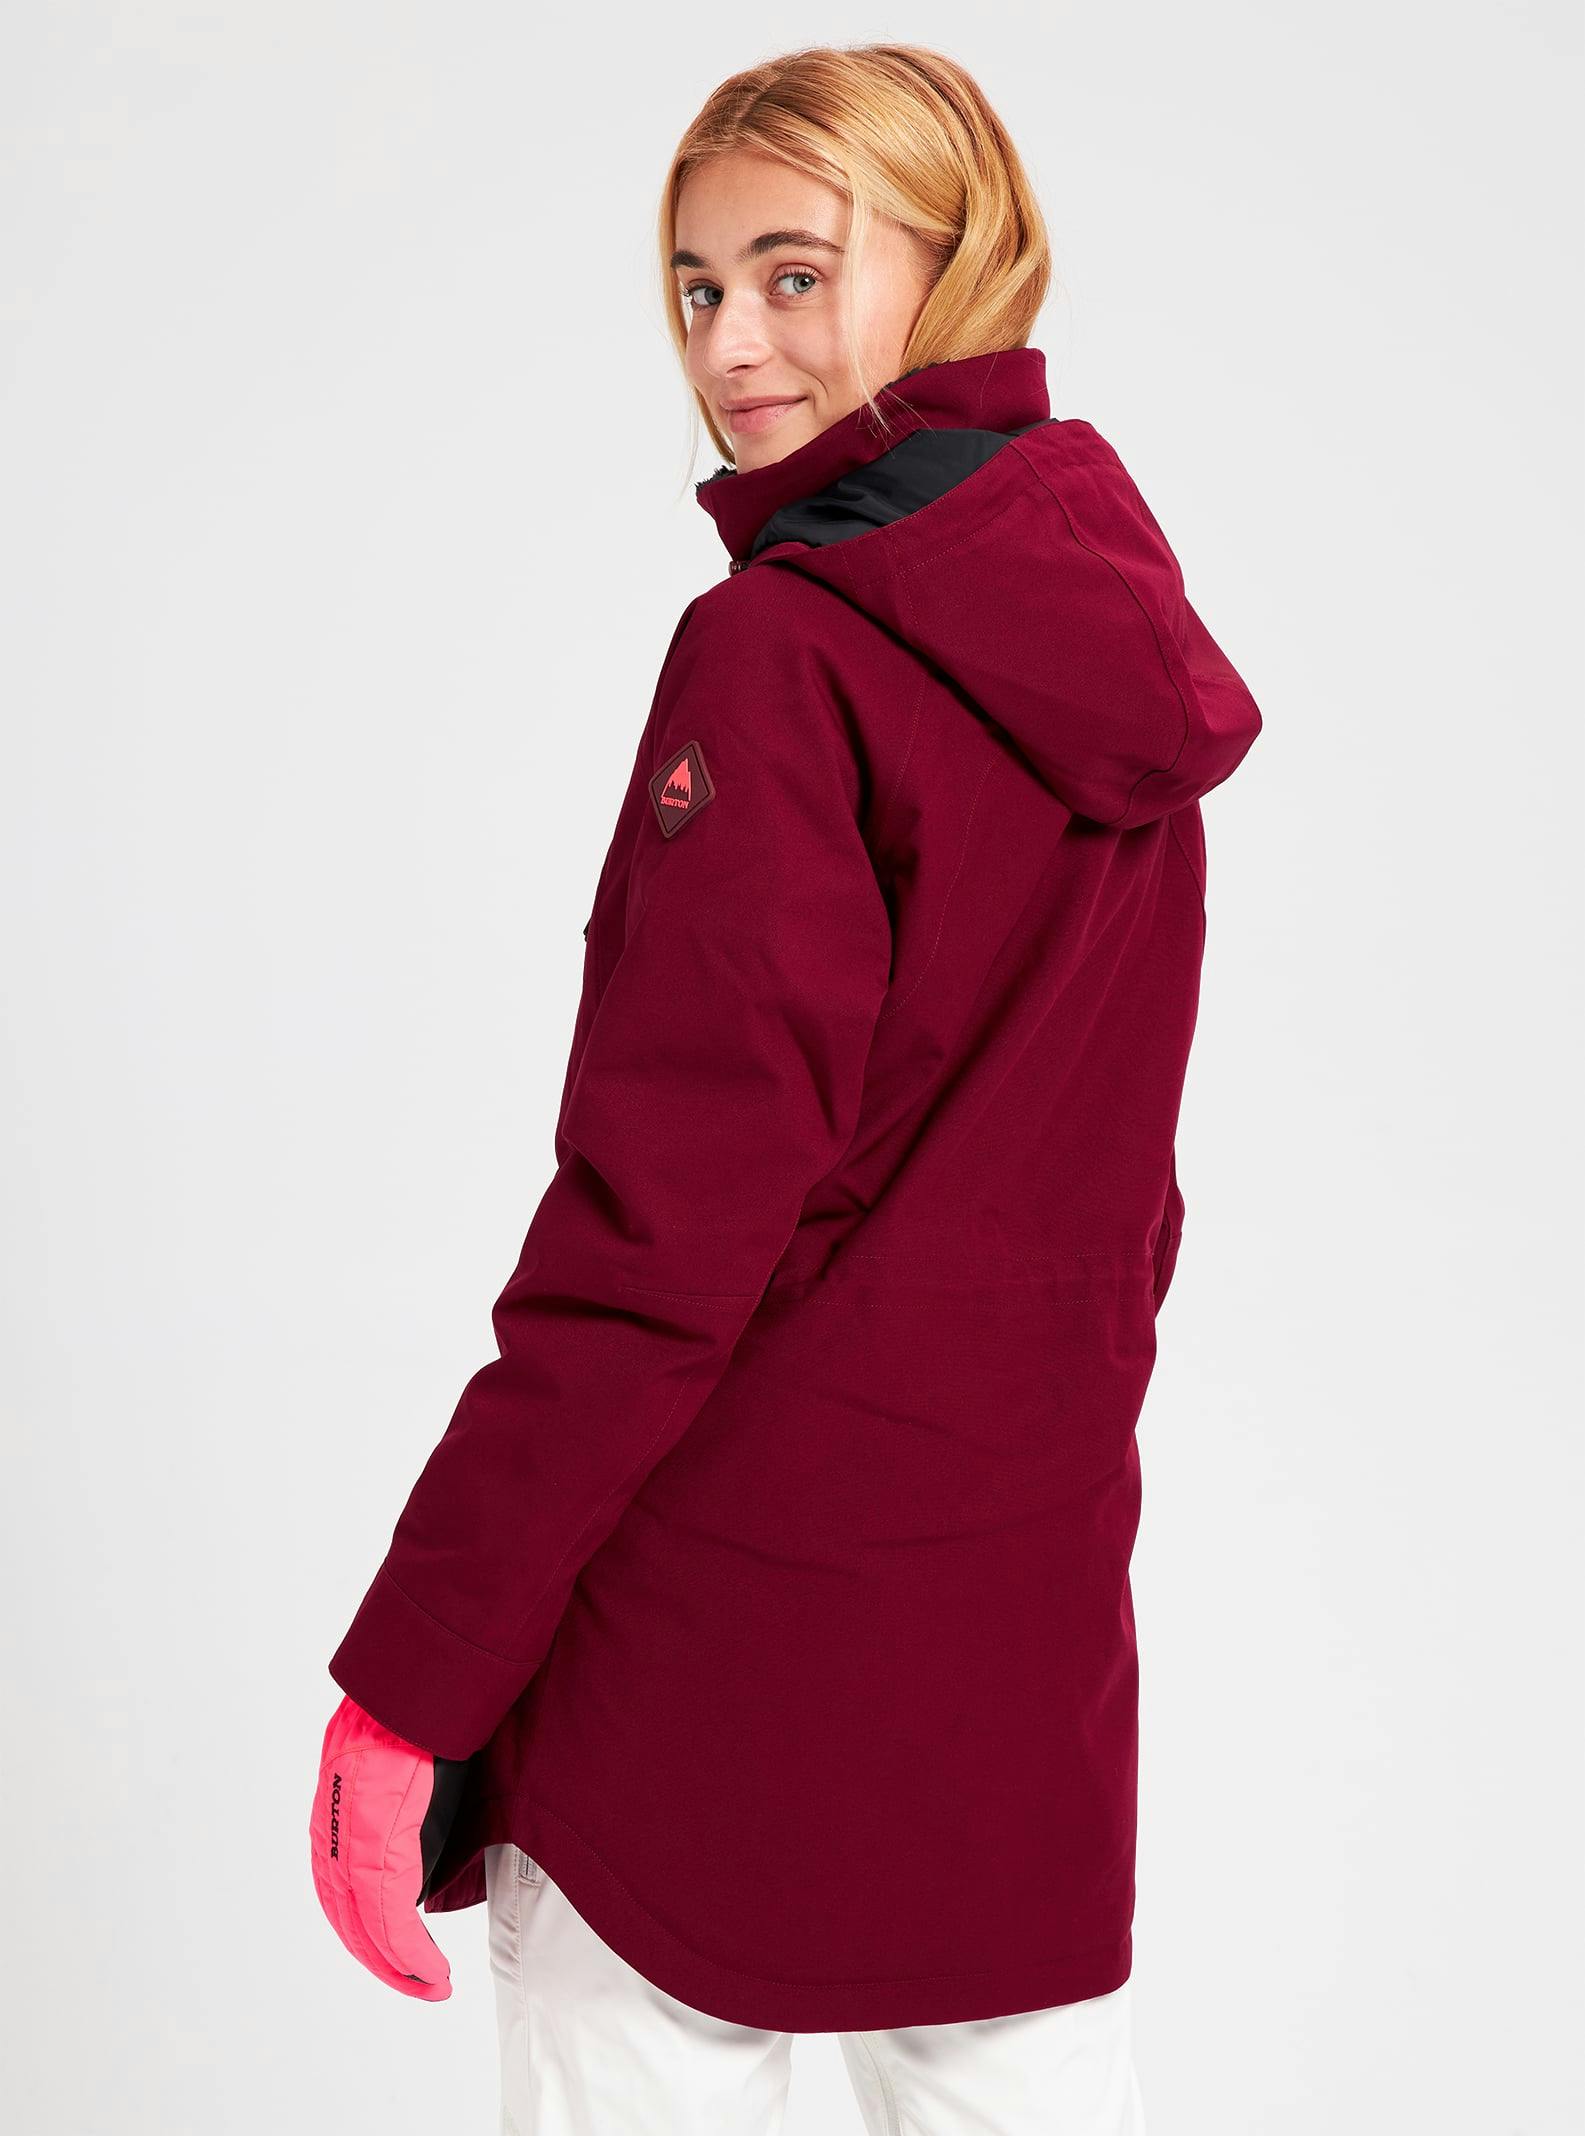 Burton Women's Prowess 2L Insulated Jacket | Curated.com